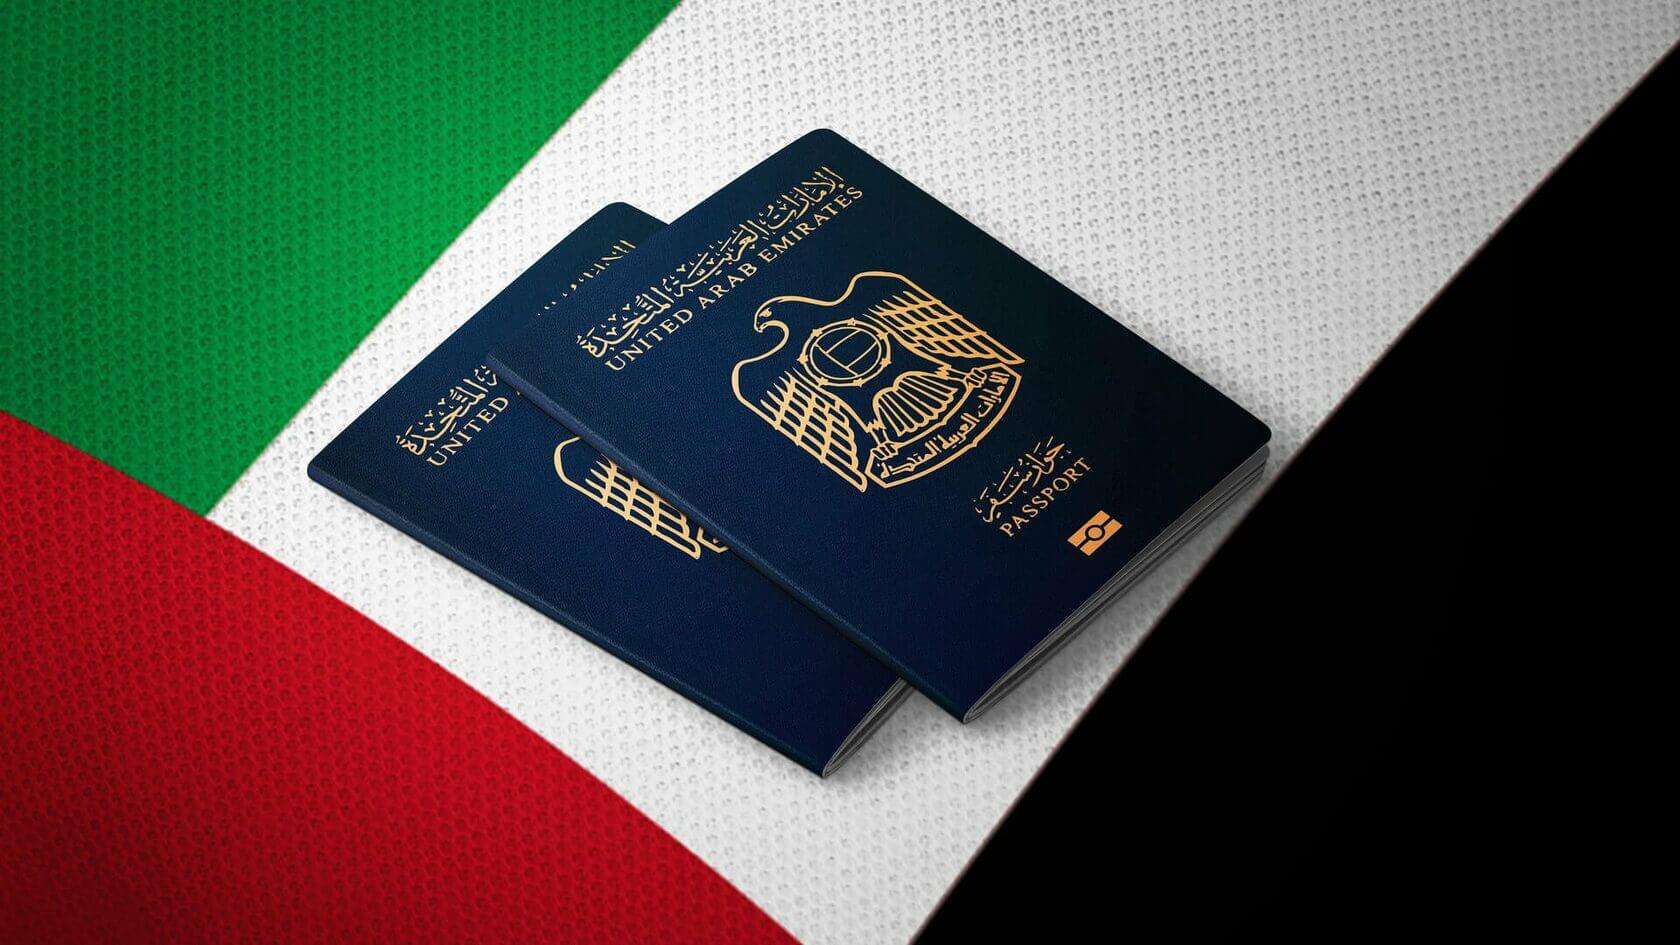 Is Dual Nationality Approved for Eligible Individuals?